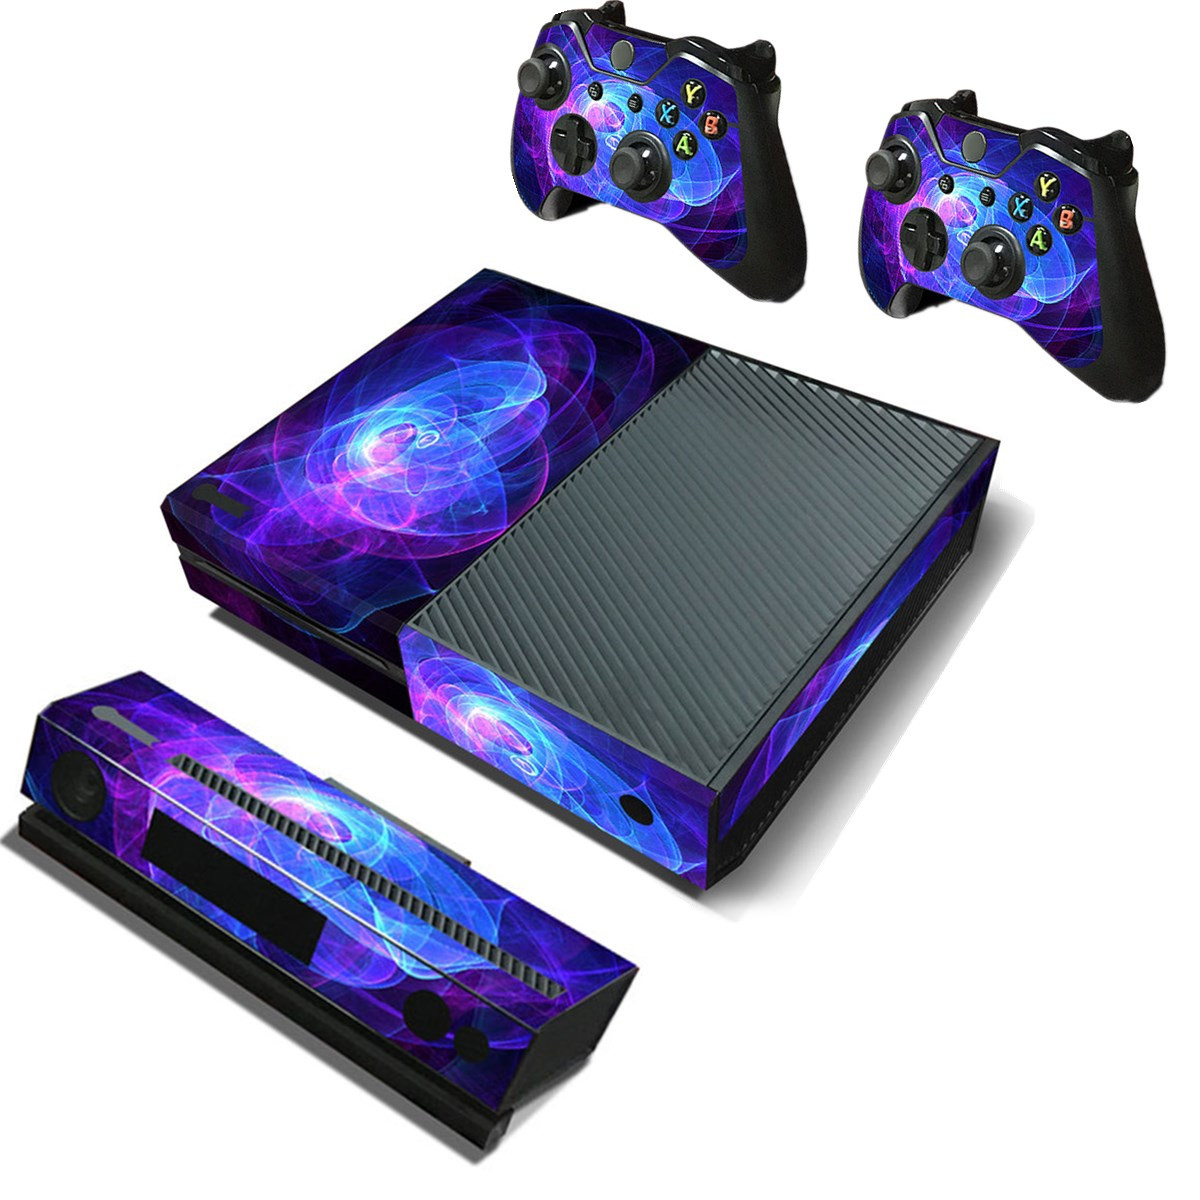 Purple Protective Vinyl Decal Skin Stickers Wrap Cover For Xbox One Game Console Game Controller Kinect 25